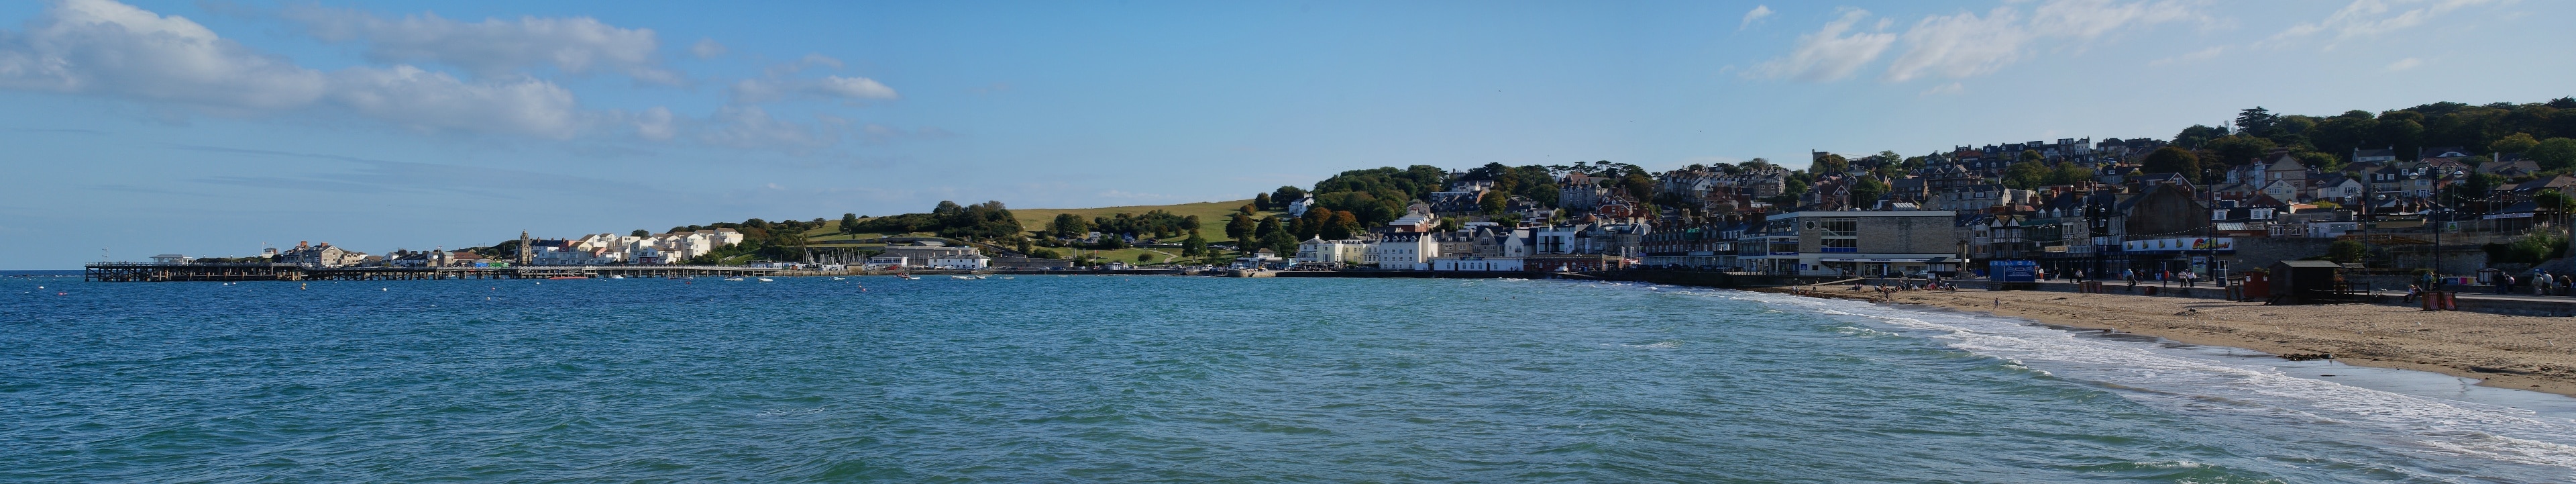 A stitch showing the seafront and harbour at Swanage in Dorset. This is part of the World heritage site the Jurassic Coast.